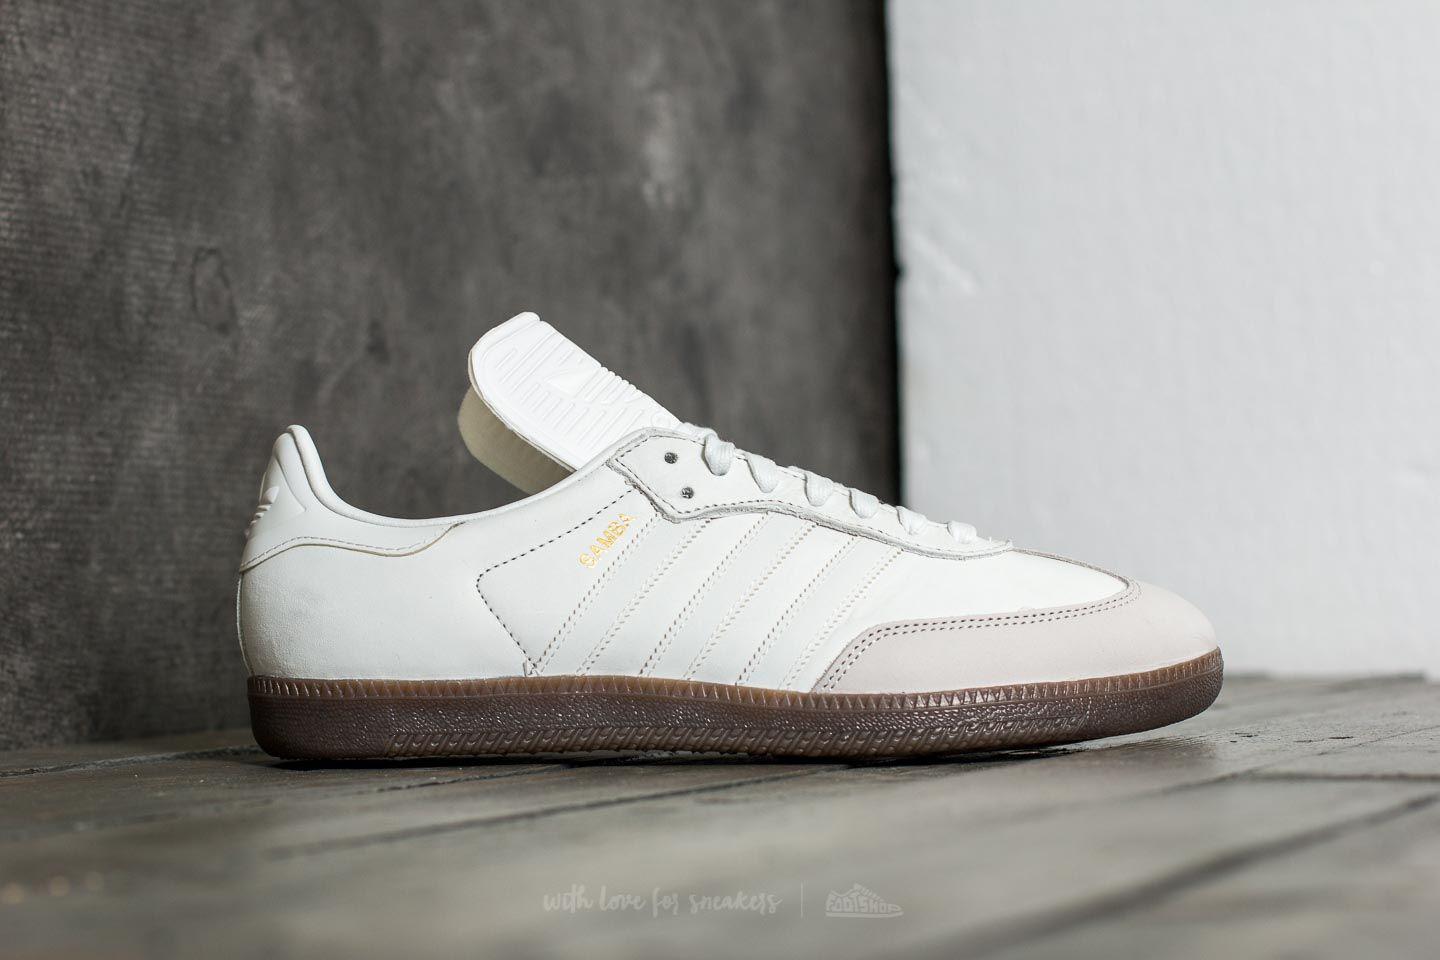 adidas Originals Leather Adidas Samba Classic Og Vintage White/ Reflective/  Pearl Grey in Gray for Men - Lyst